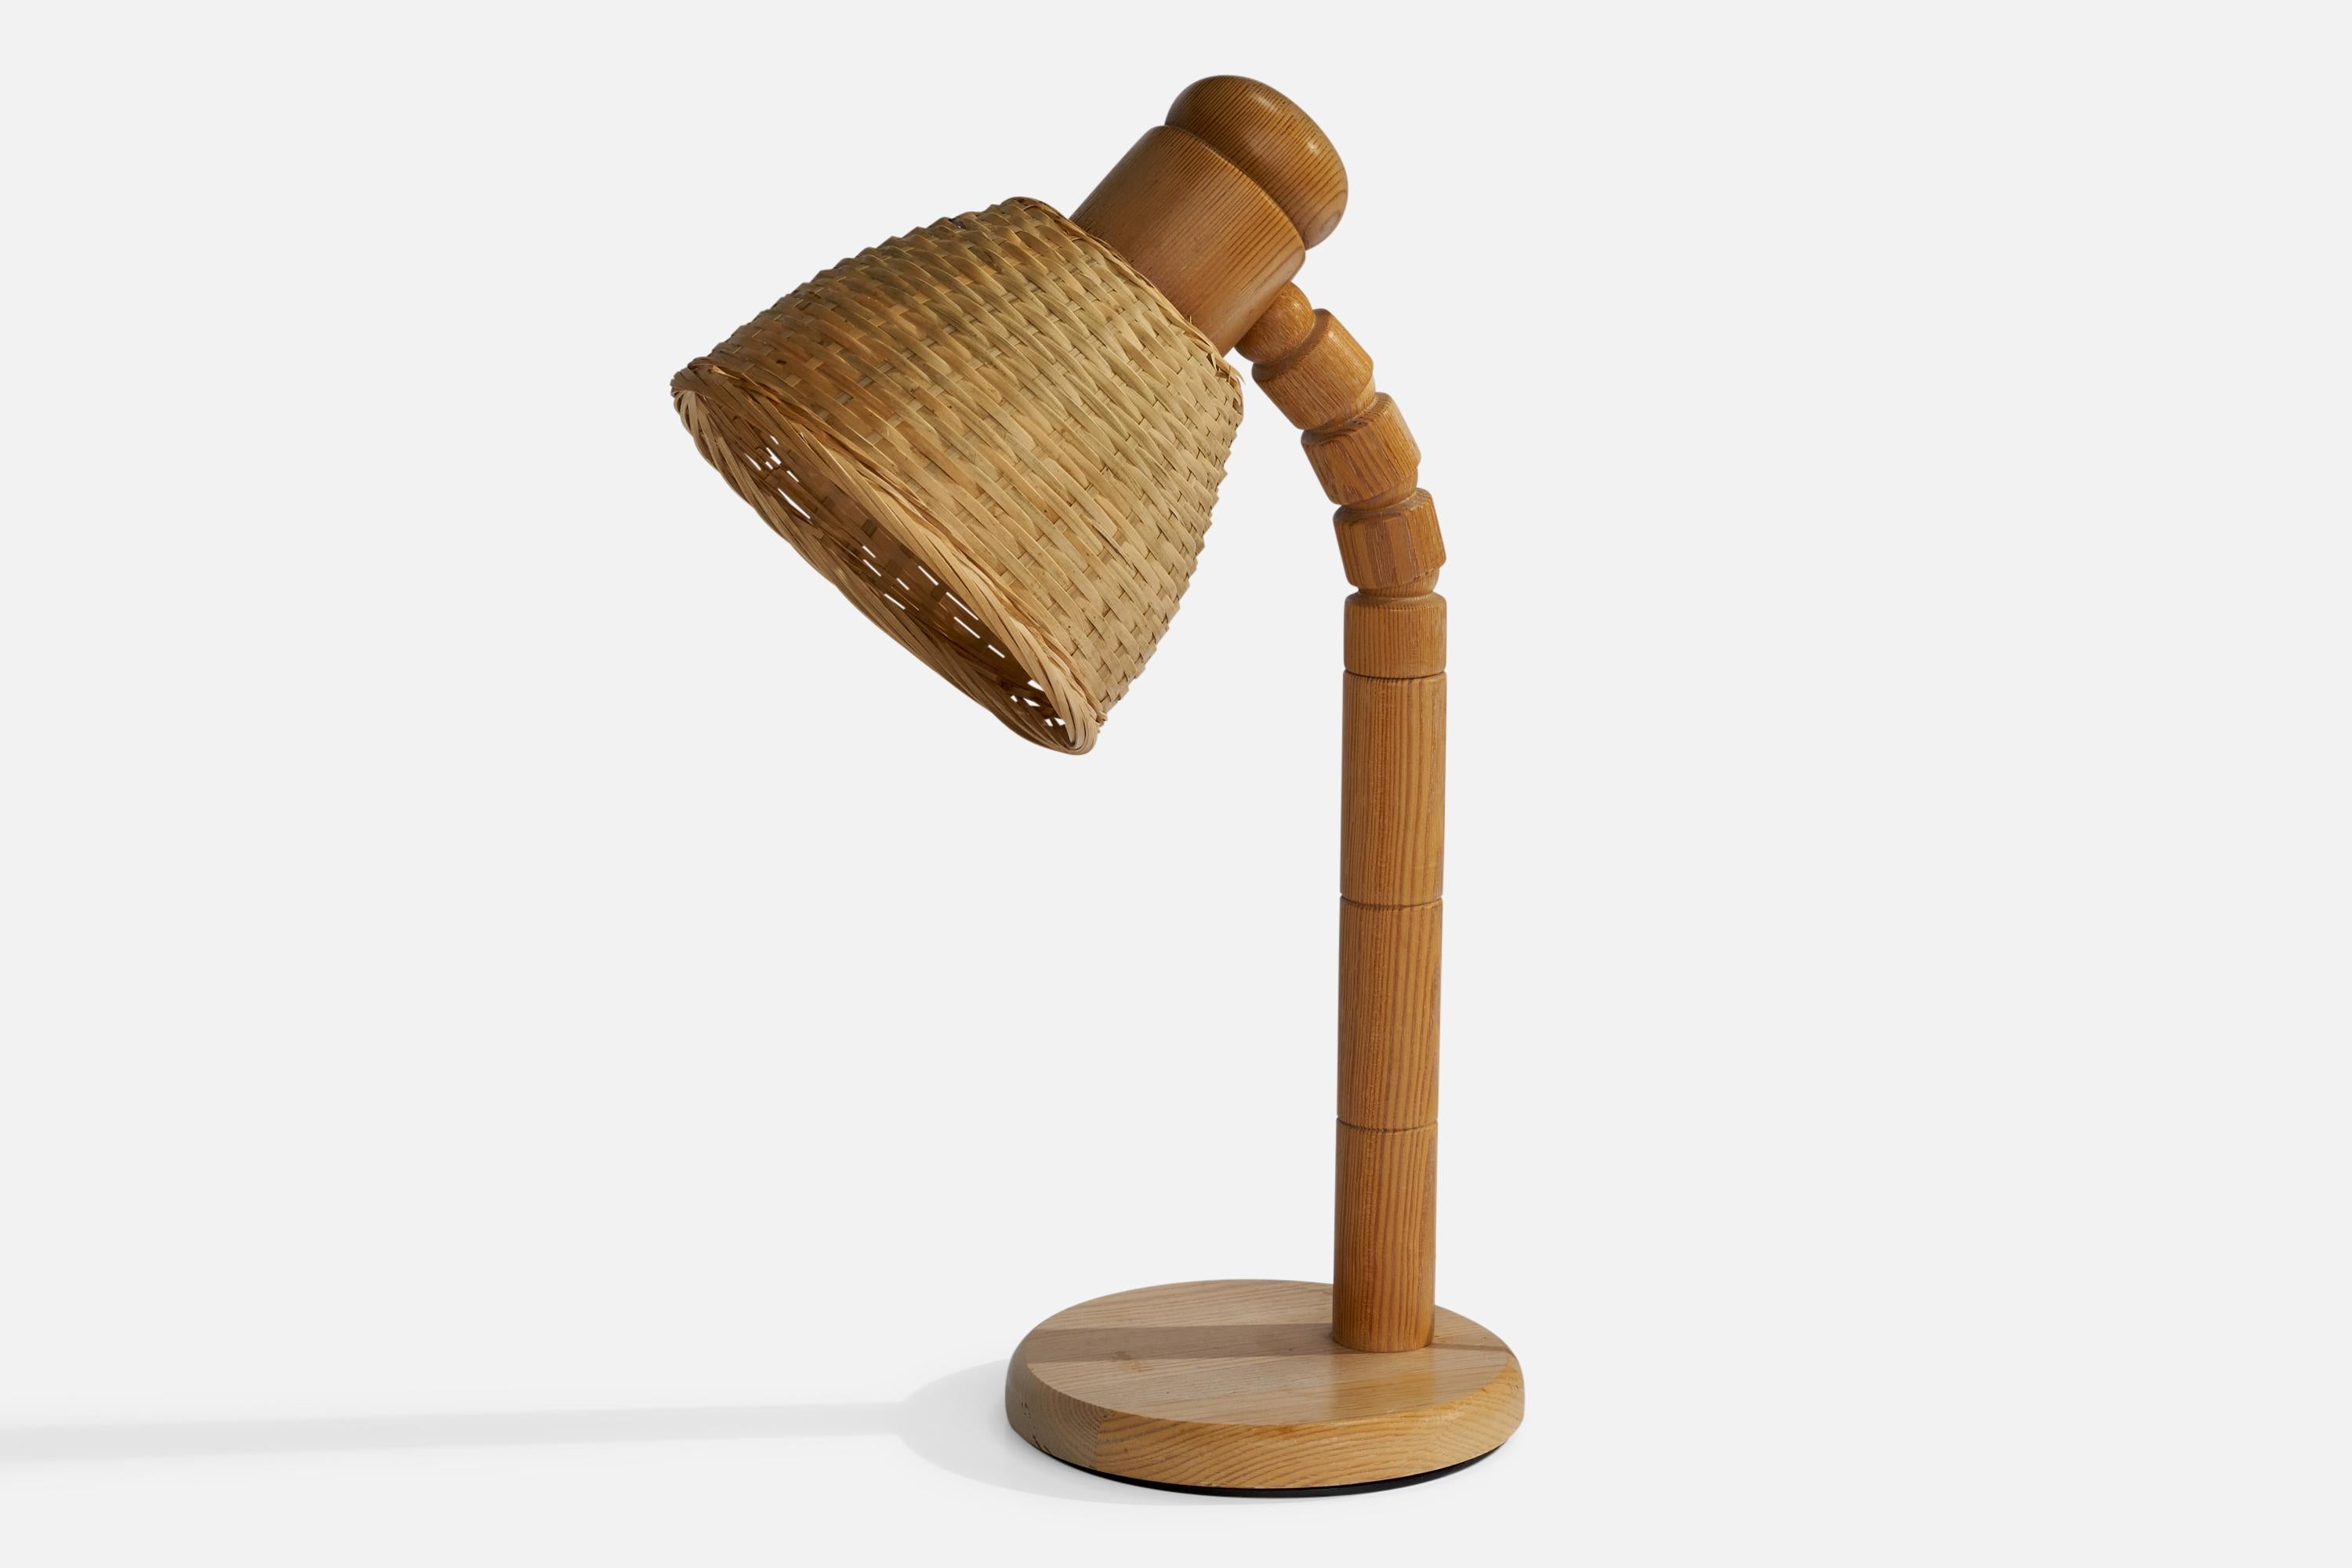 Solbackens Svarveri, Table Lamps, Pine, Rattan, Sweden, 1970s In Good Condition For Sale In High Point, NC